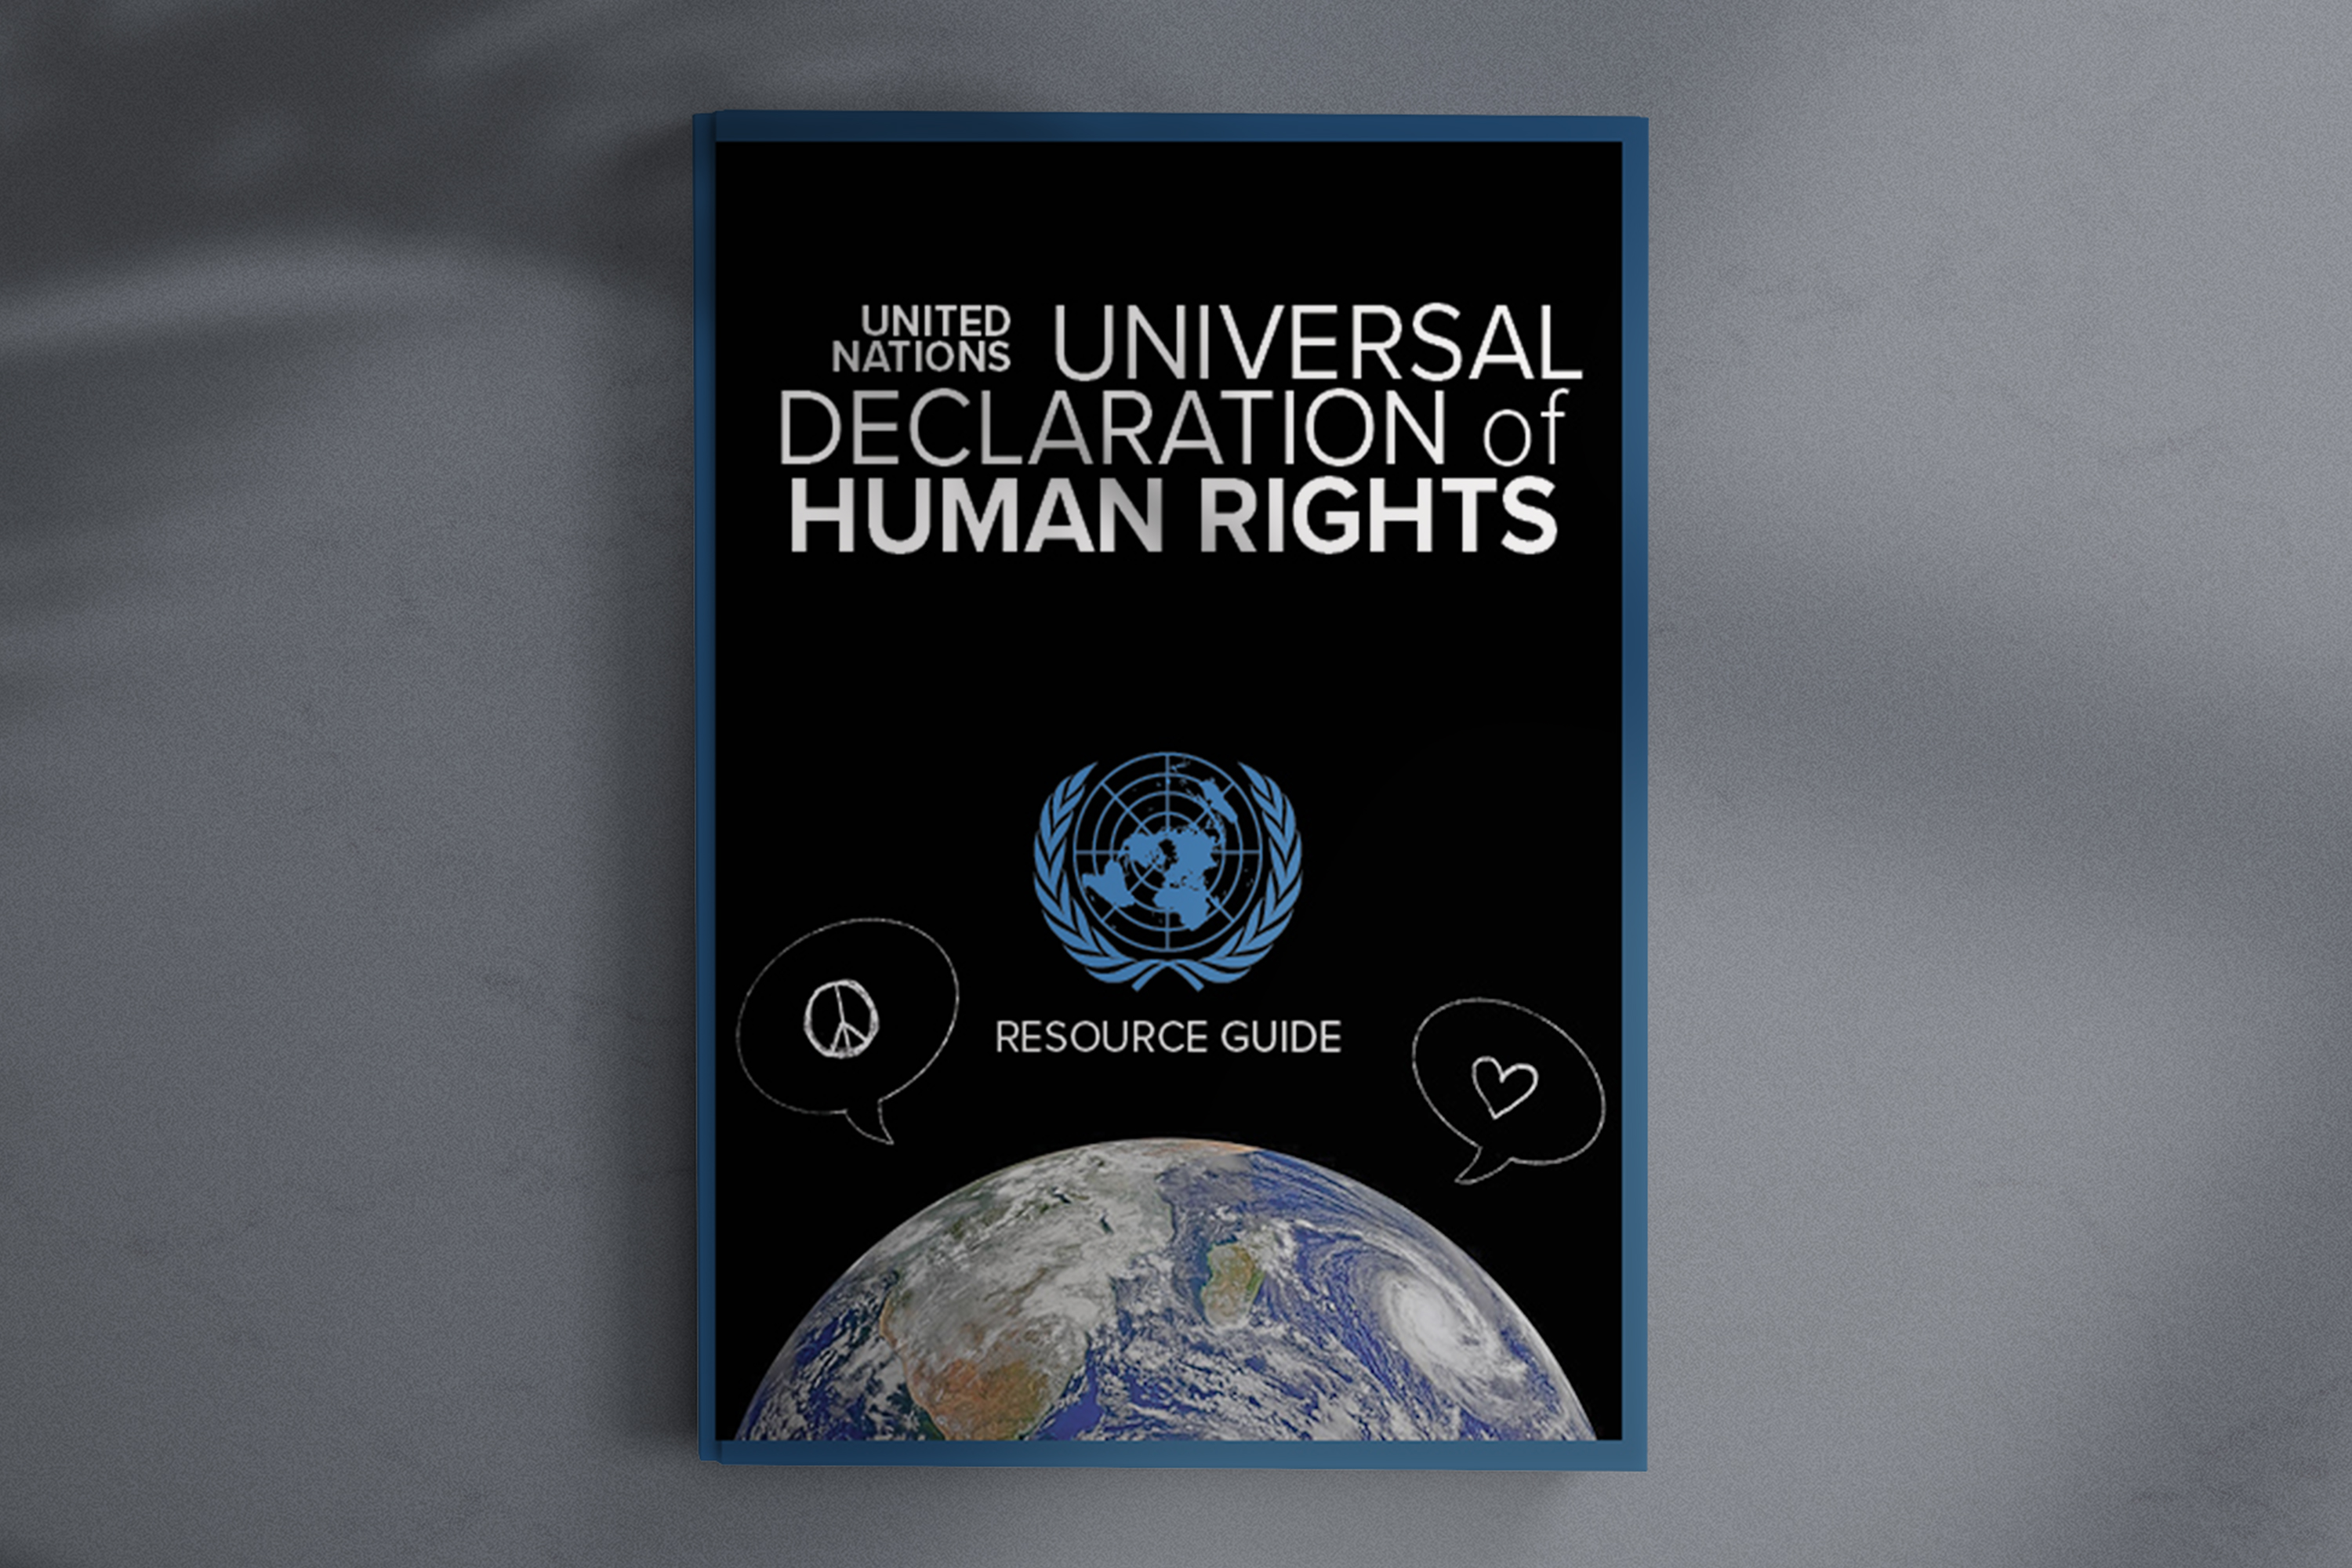 Thecover of the UN booklet on a grey background.